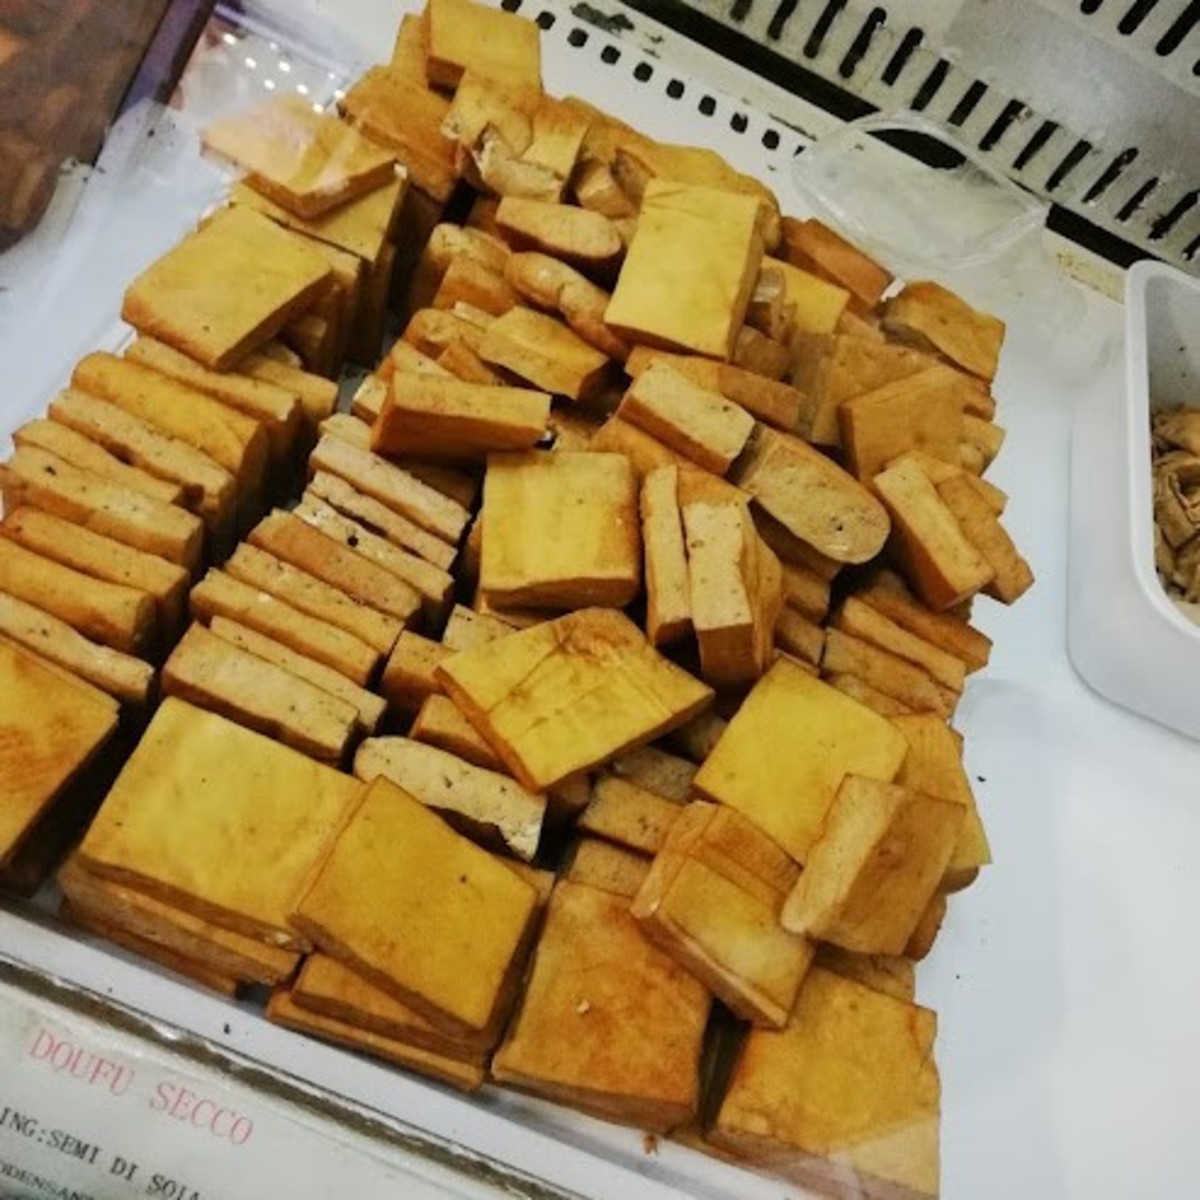 Dried tofu sold in a shop specialized in Chinese shop specialized in artisanal soy-based food